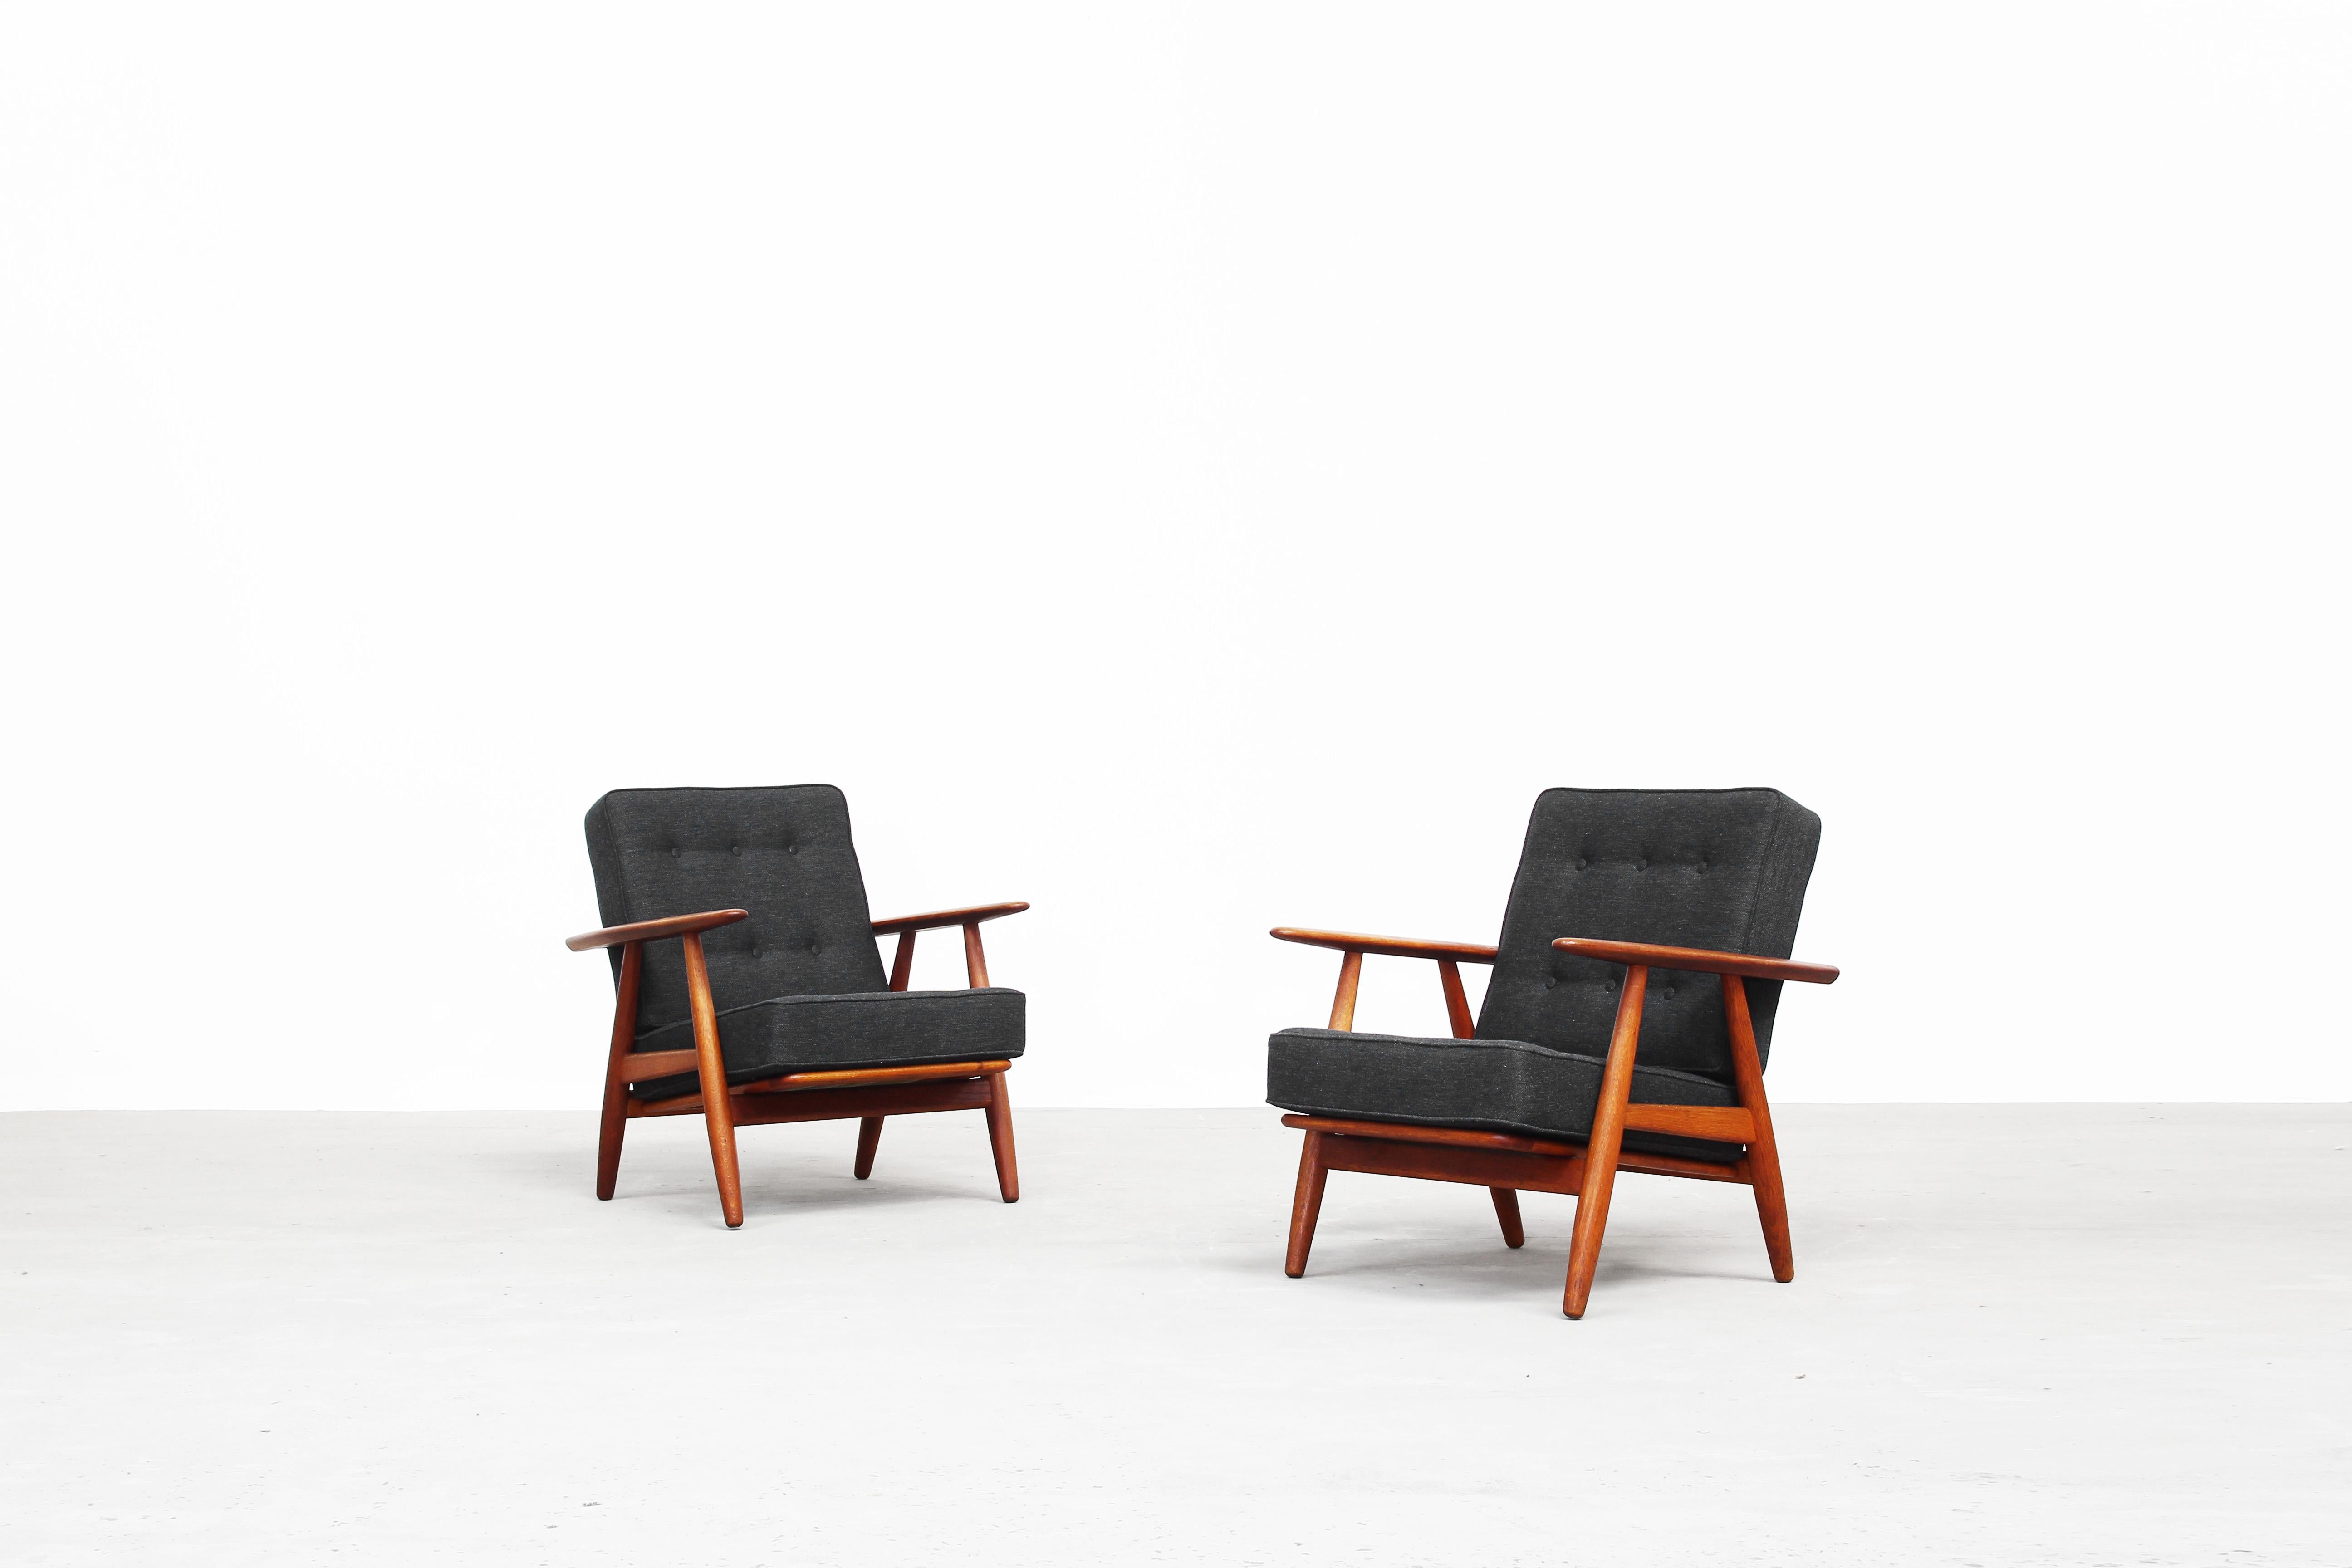 Very beautiful pair of lounge chairs model 240 designed by Hans J. Wegner and produced by GETAMA in Denmark in the 1960s.
The chairs are in an excellent condition with a great patinated oakwood frame. The cushions were newly reupholstered with a